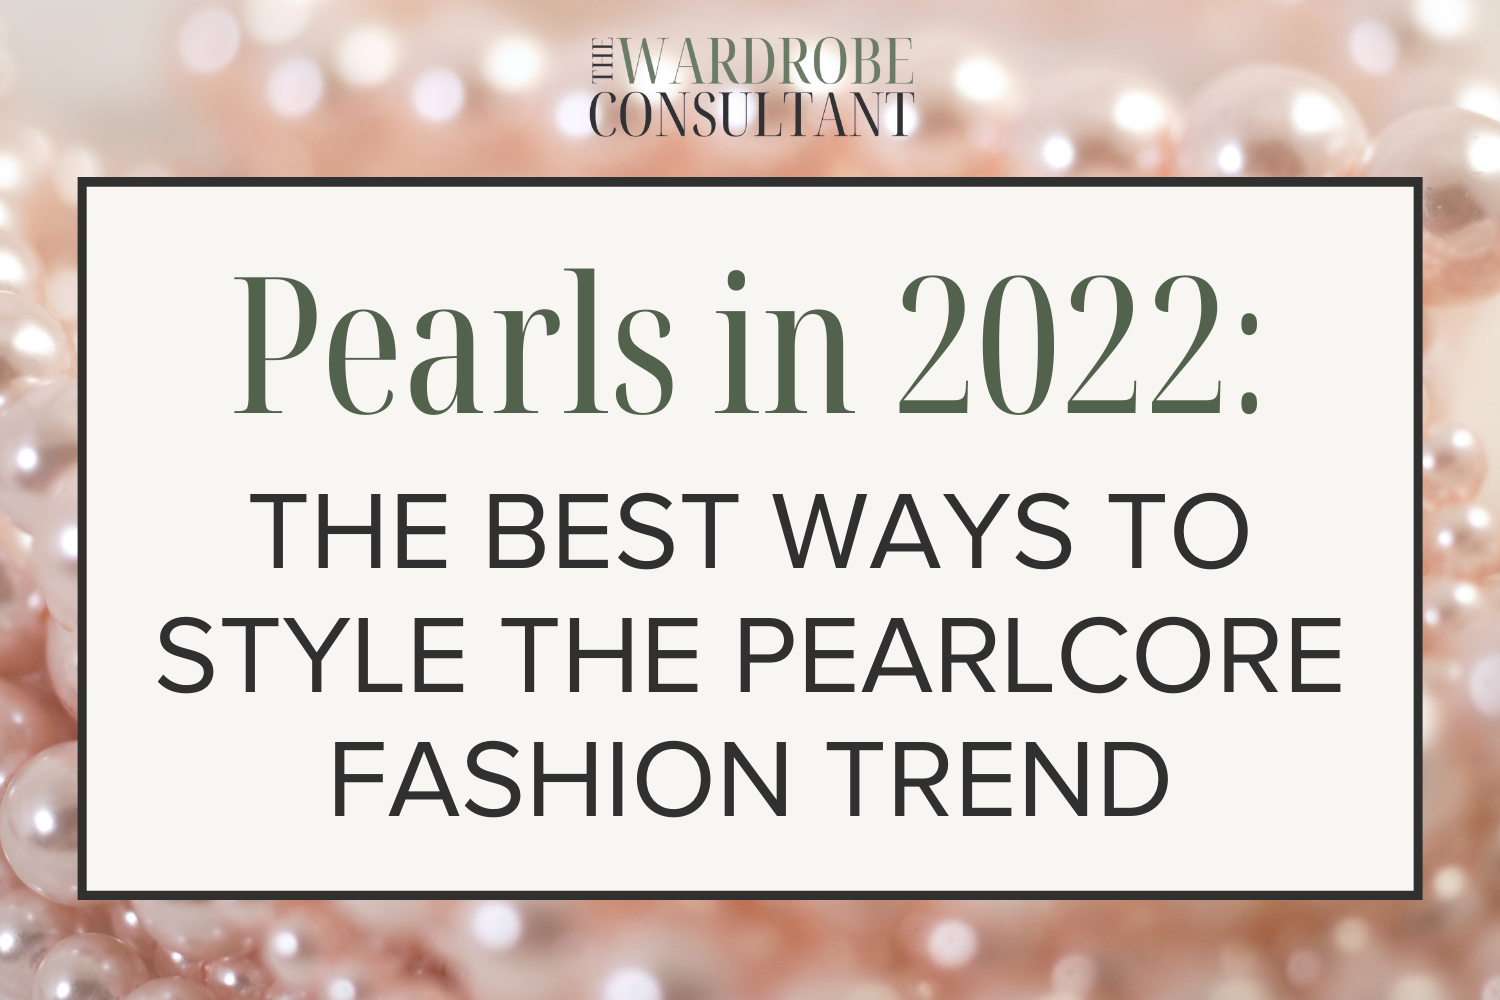 Pearls in 2022: Best Ways To Style the Pearlcore Fashion Trend